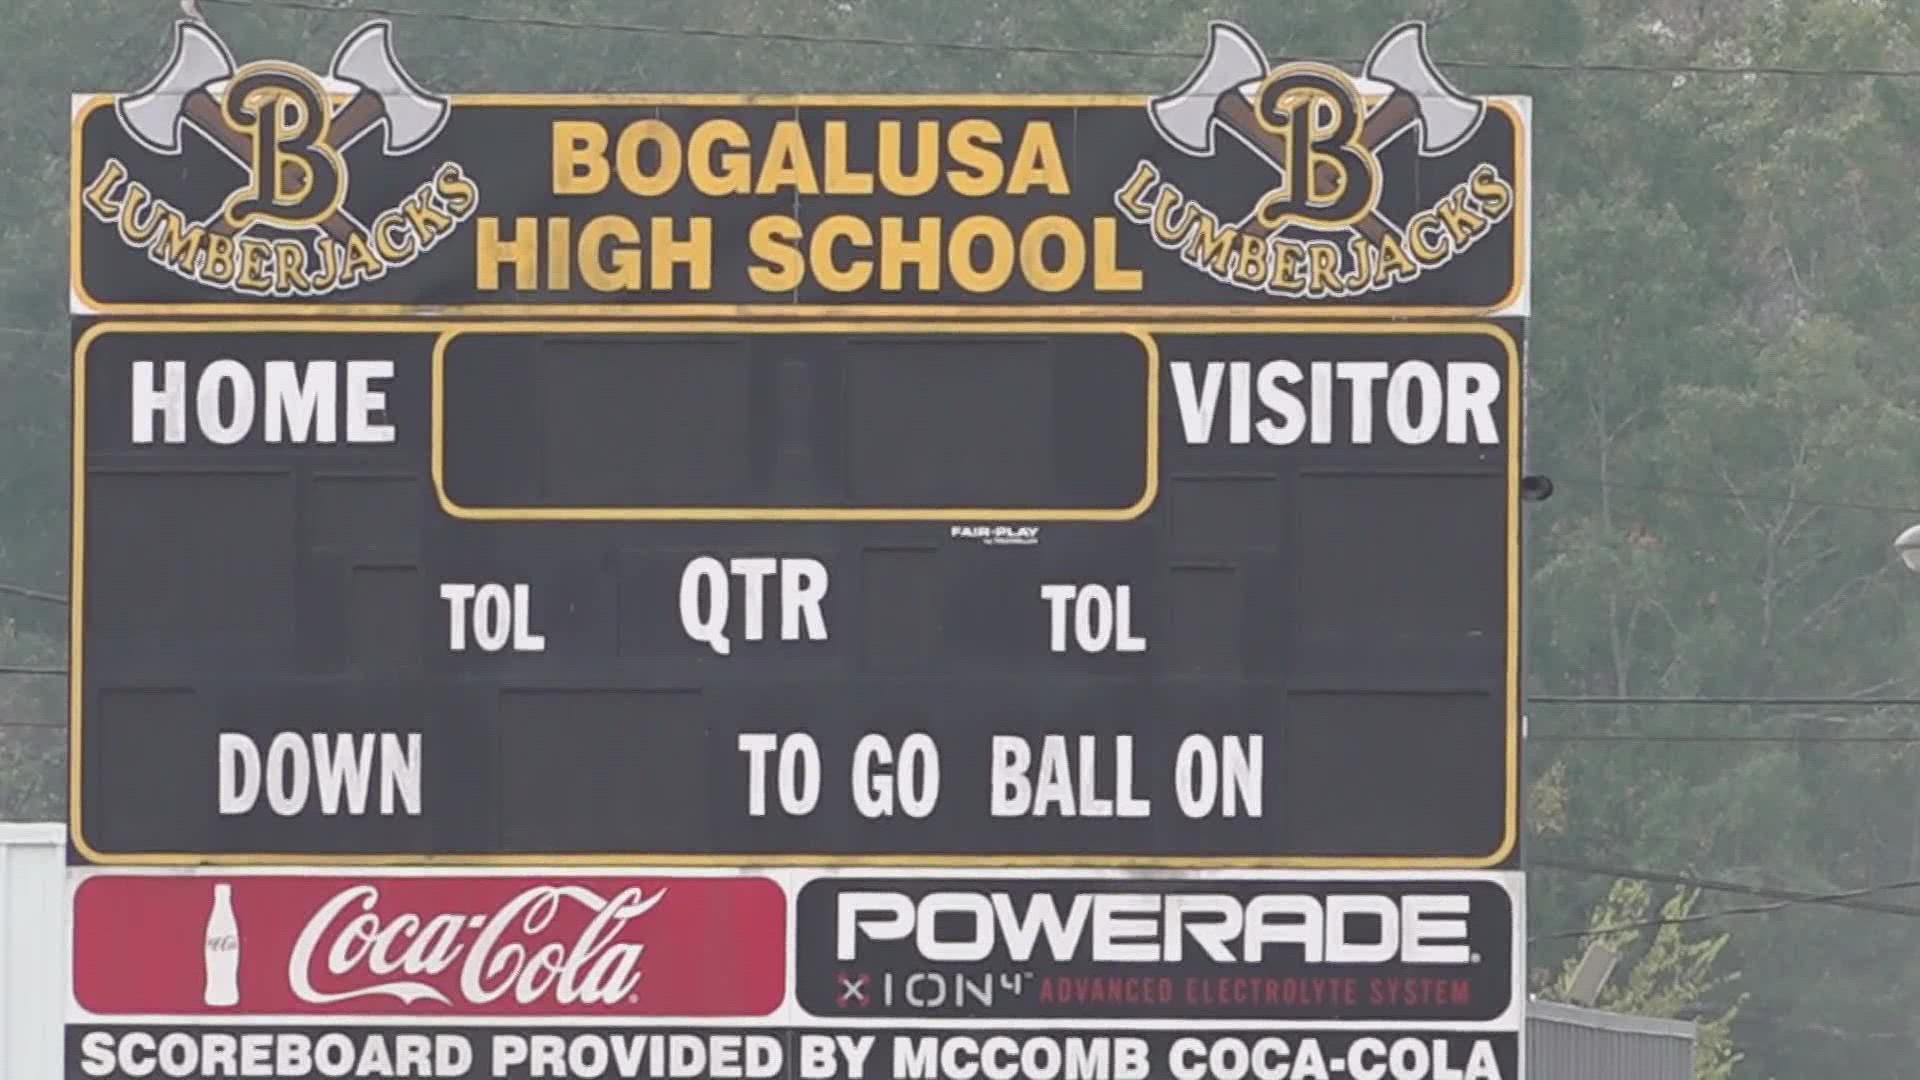 LHSAA officials decided to move the game to a neutral site after a 15-year-old boy was killed in a shooting outside Bogalusa High School football stadium.